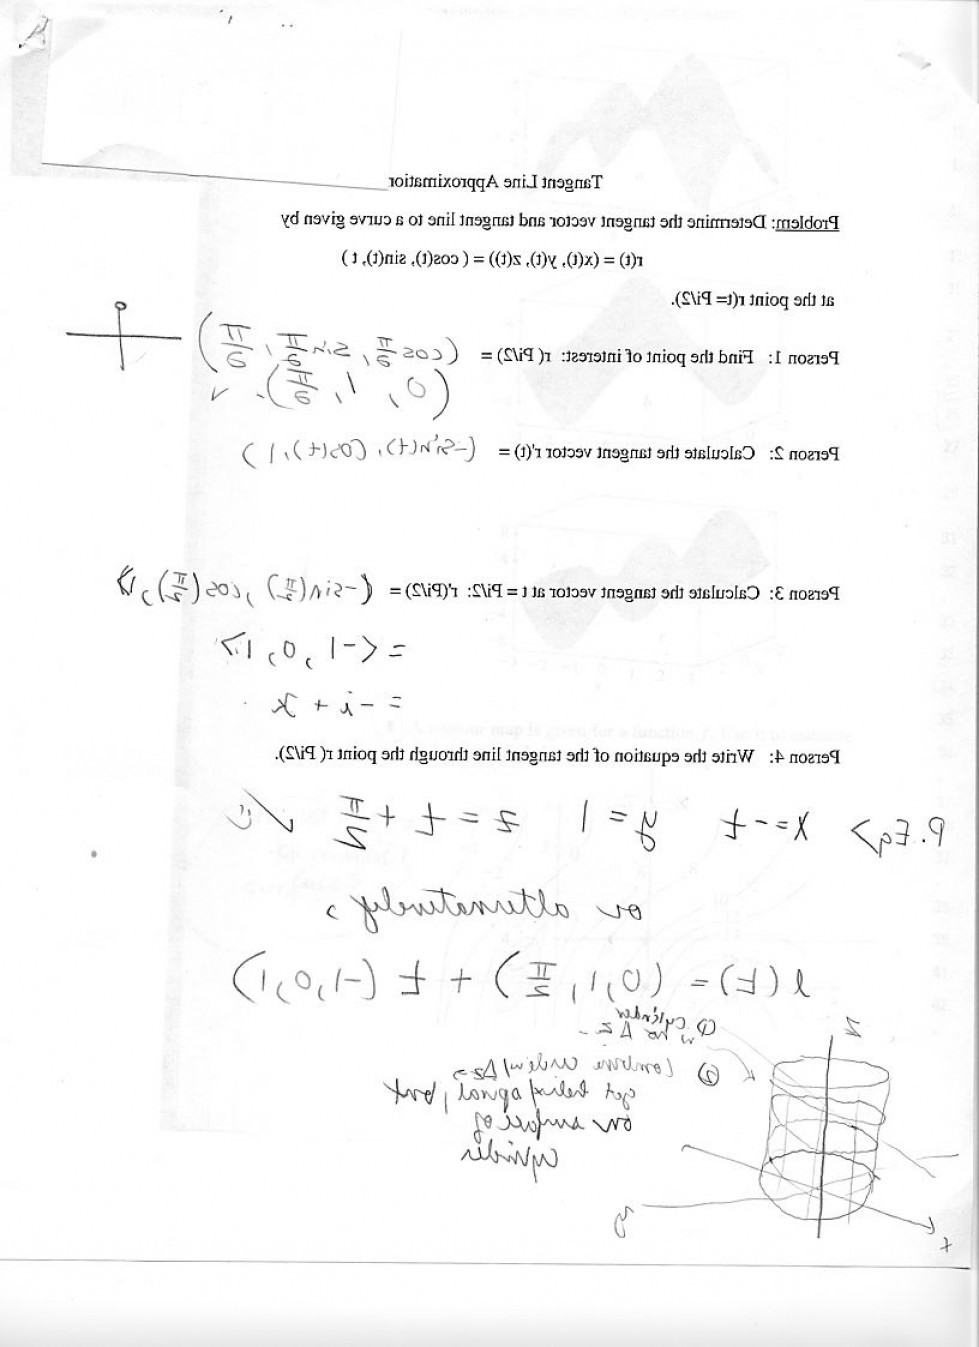 vector-addition-worksheet-answers-math-worksheets-printable